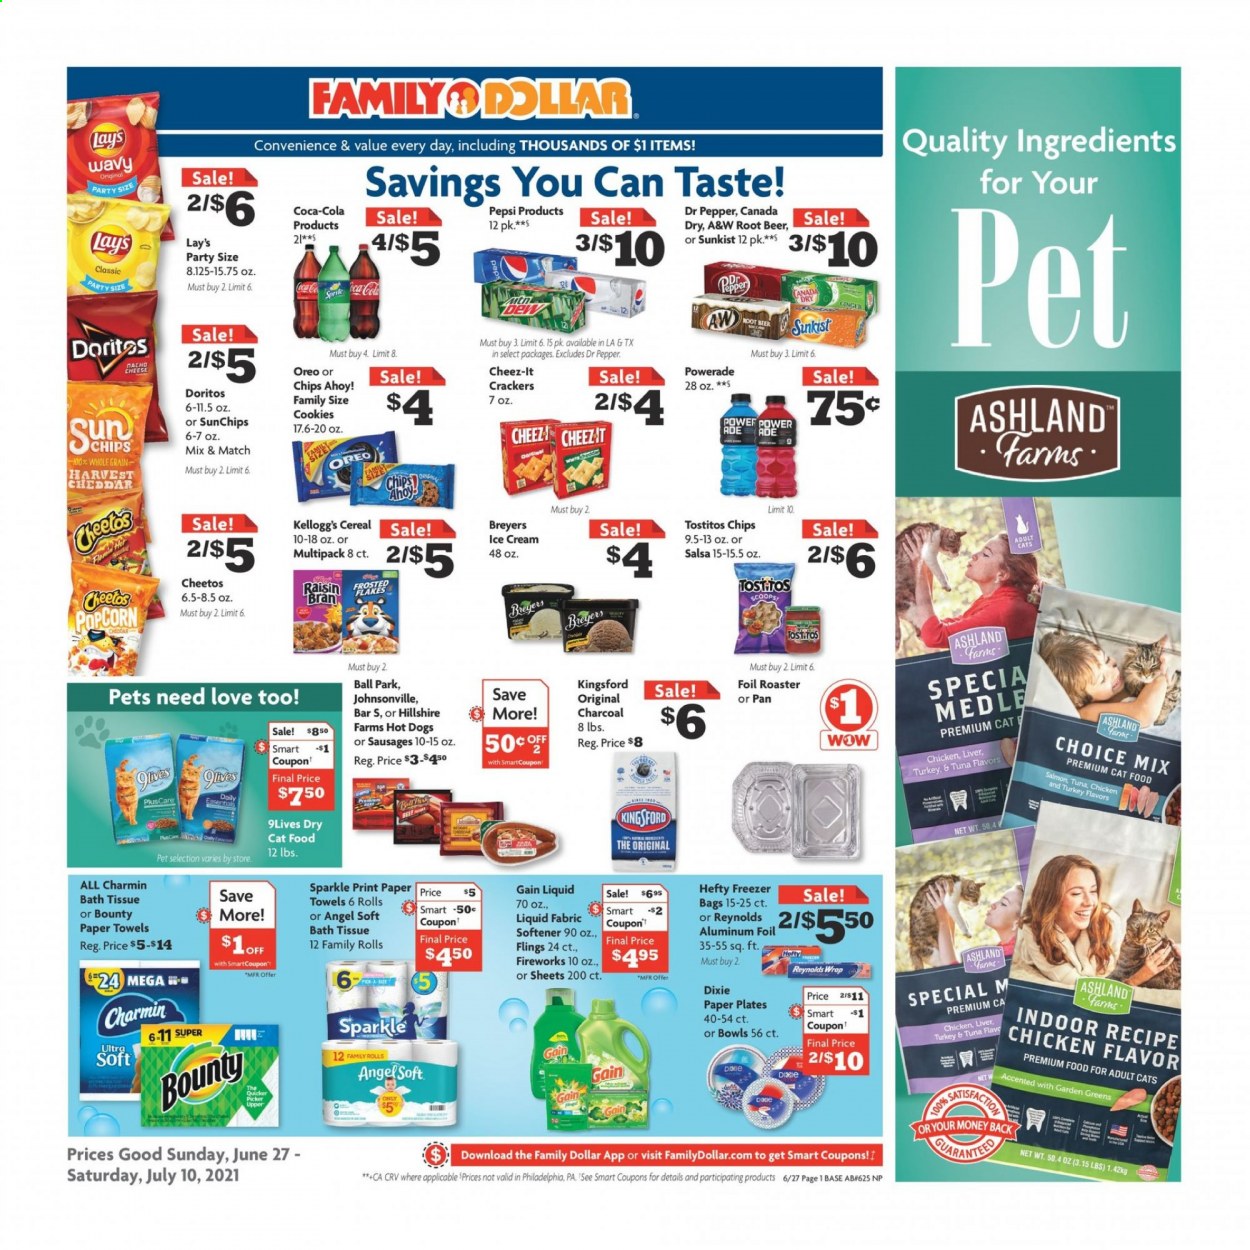 thumbnail - Family Dollar Flyer - 06/27/2021 - 07/10/2021 - Sales products - ginger, hot dog, Johnsonville, sausage, cheese, ice cream, cookies, Bounty, crackers, Kellogg's, Chips Ahoy!, Doritos, Cheetos, chips, Lay’s, popcorn, Cheez-It, Tostitos, cereals, Raisin Bran, salsa, Canada Dry, Coca-Cola, Powerade, Pepsi, Dr. Pepper, A&W, beer, bath tissue, kitchen towels, paper towels, Charmin, Gain, fabric softener, Hefty, Dixie, plate, pan, aluminium foil, freezer bag, paper plate, animal food, cat food, 9lives, Kingsford, charcoal. Page 1.